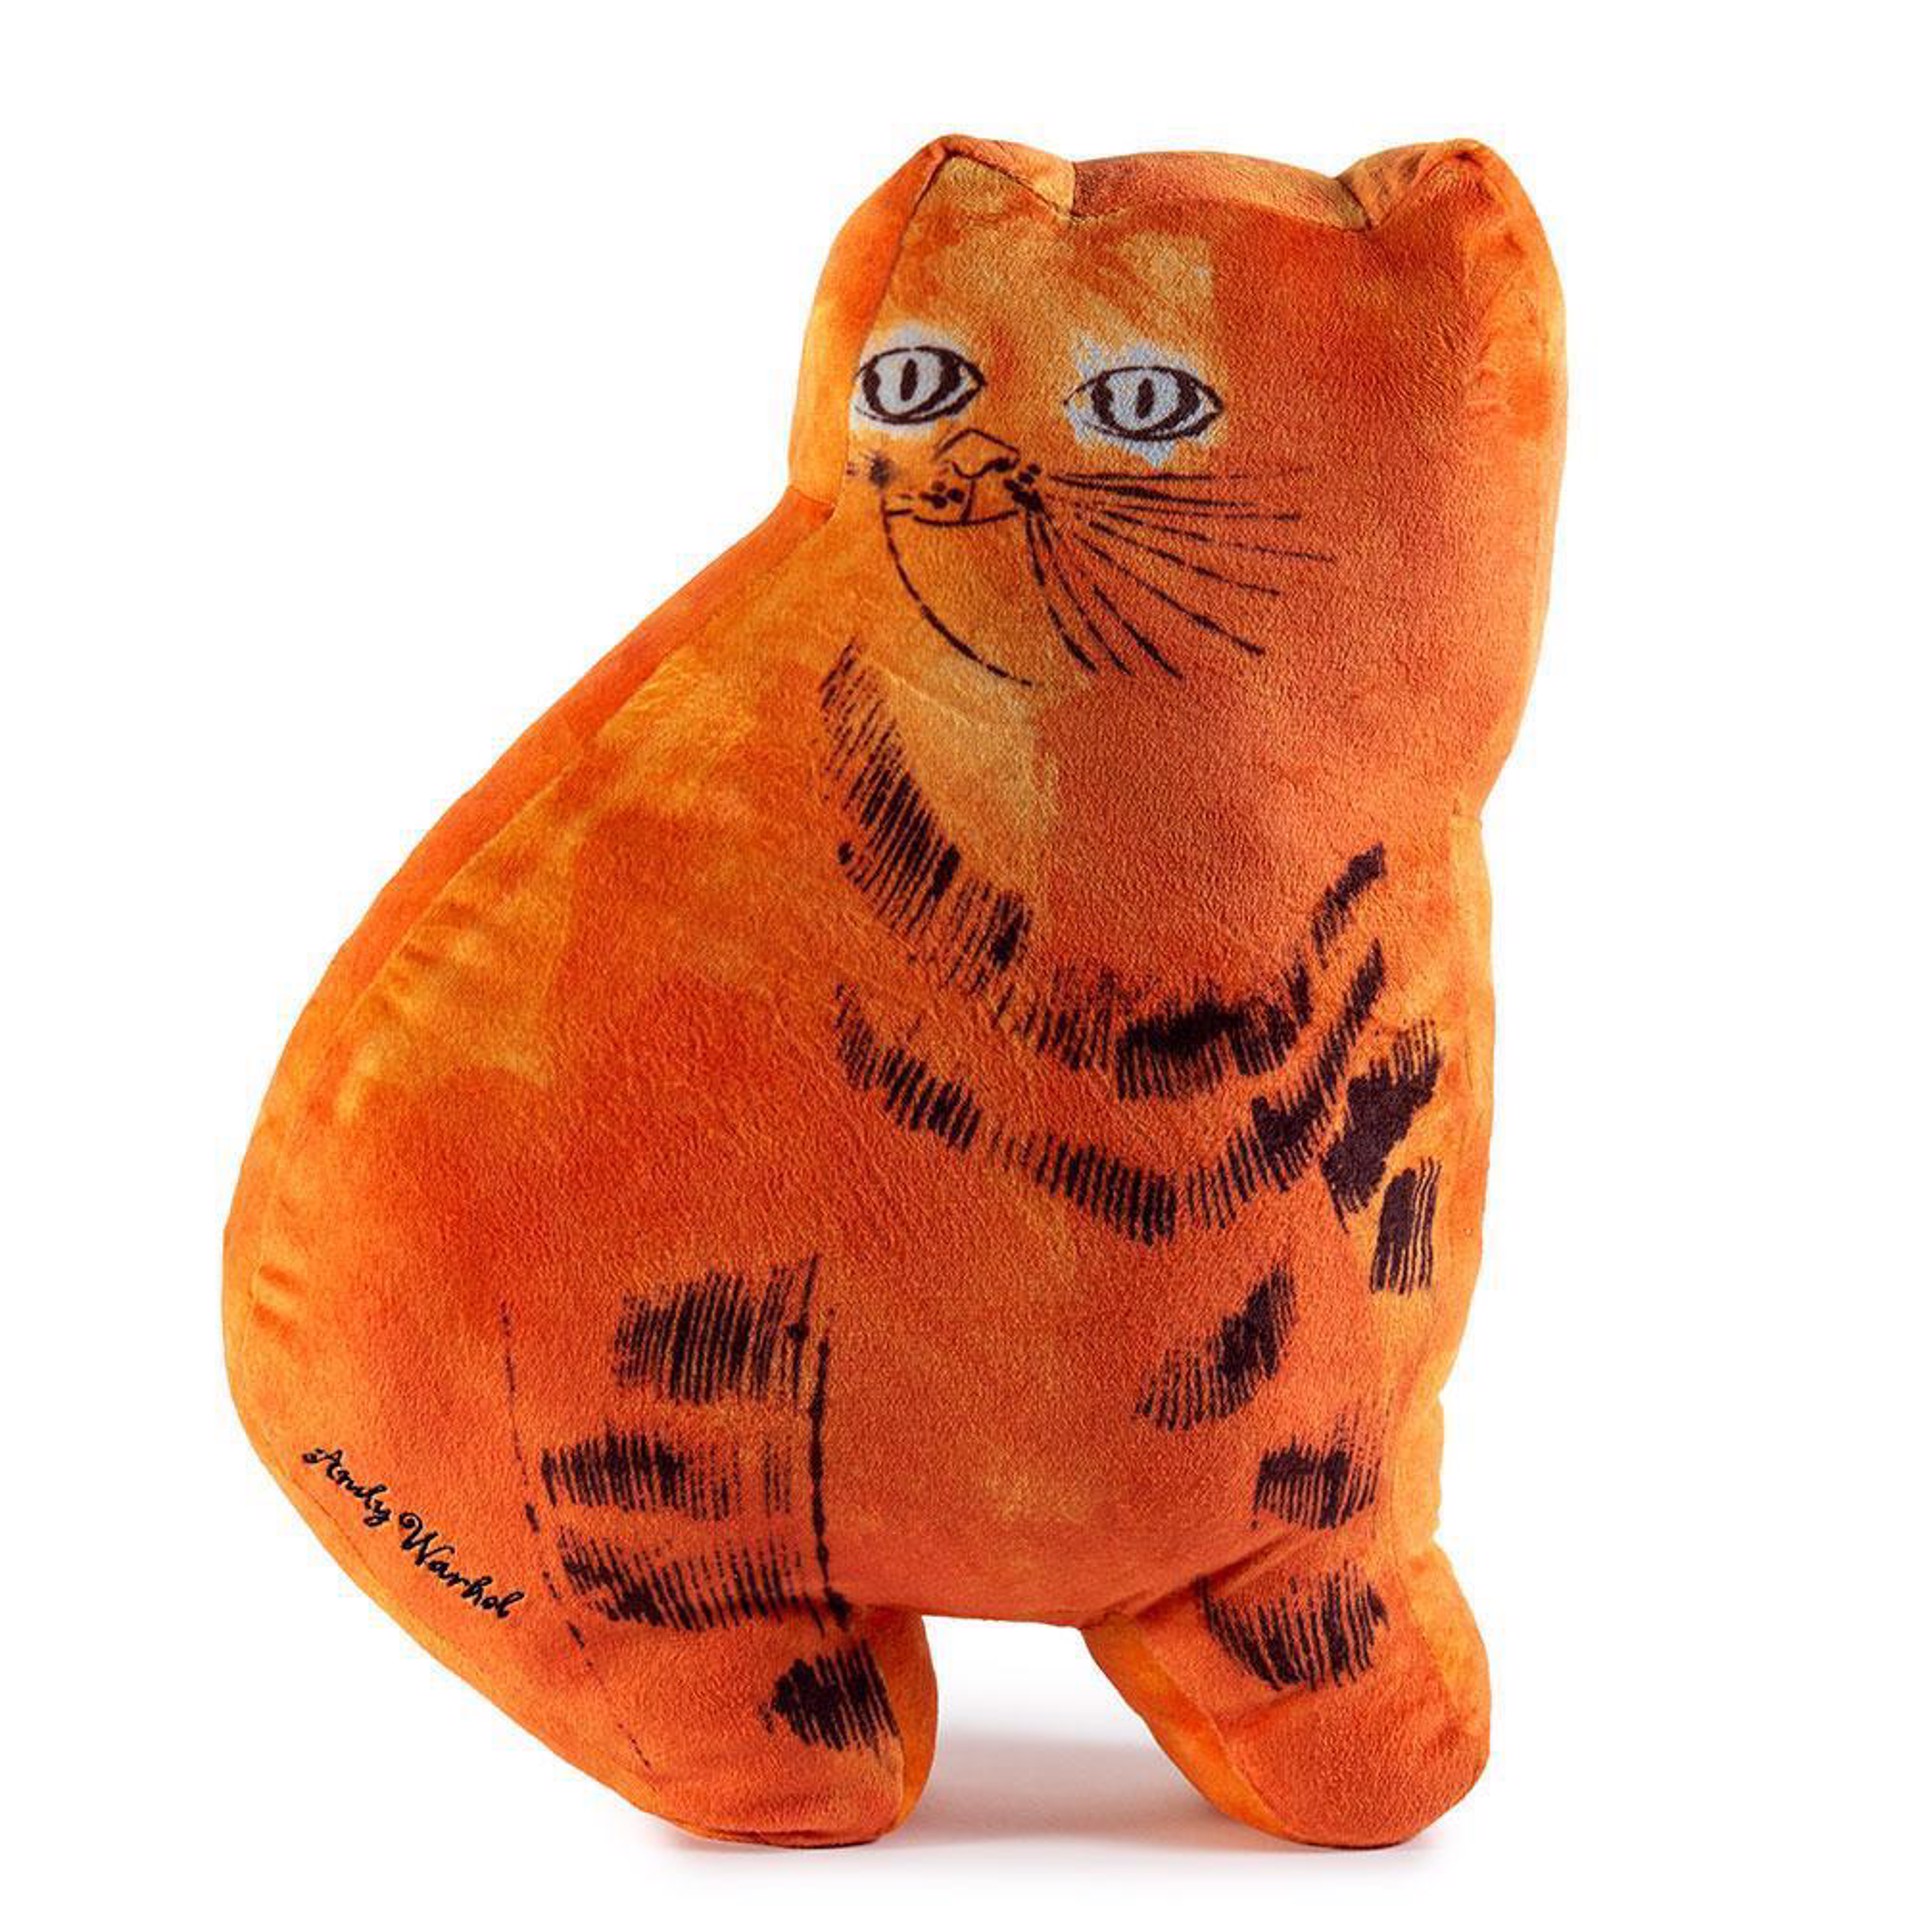 ANDY WARHOL ORANGE SAM THE CAT PLUSH PILLOW by Andy Warhol